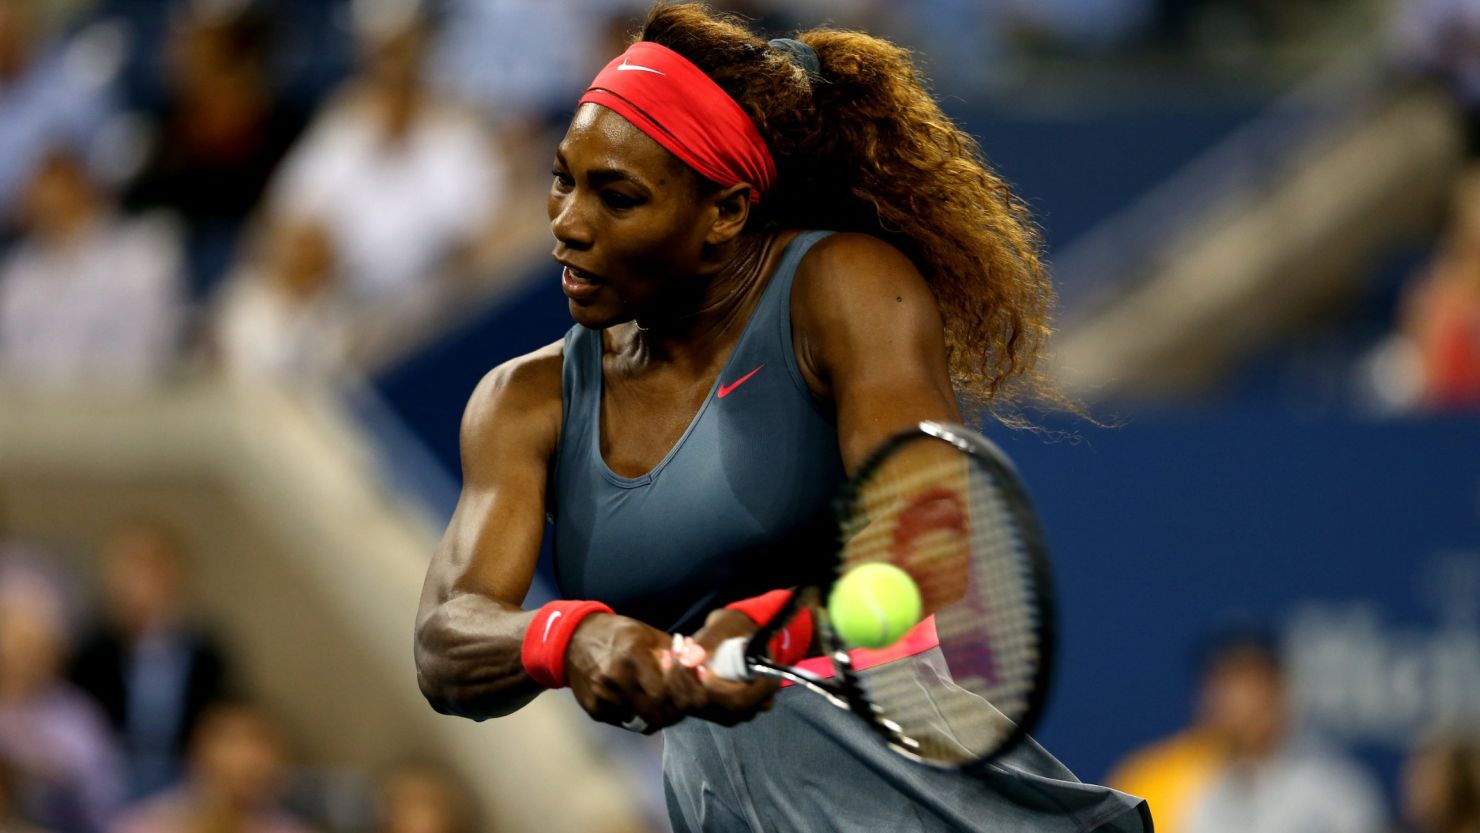 World No. 1 Serena Williams is bidding for a fifth U.S. Open singles title.